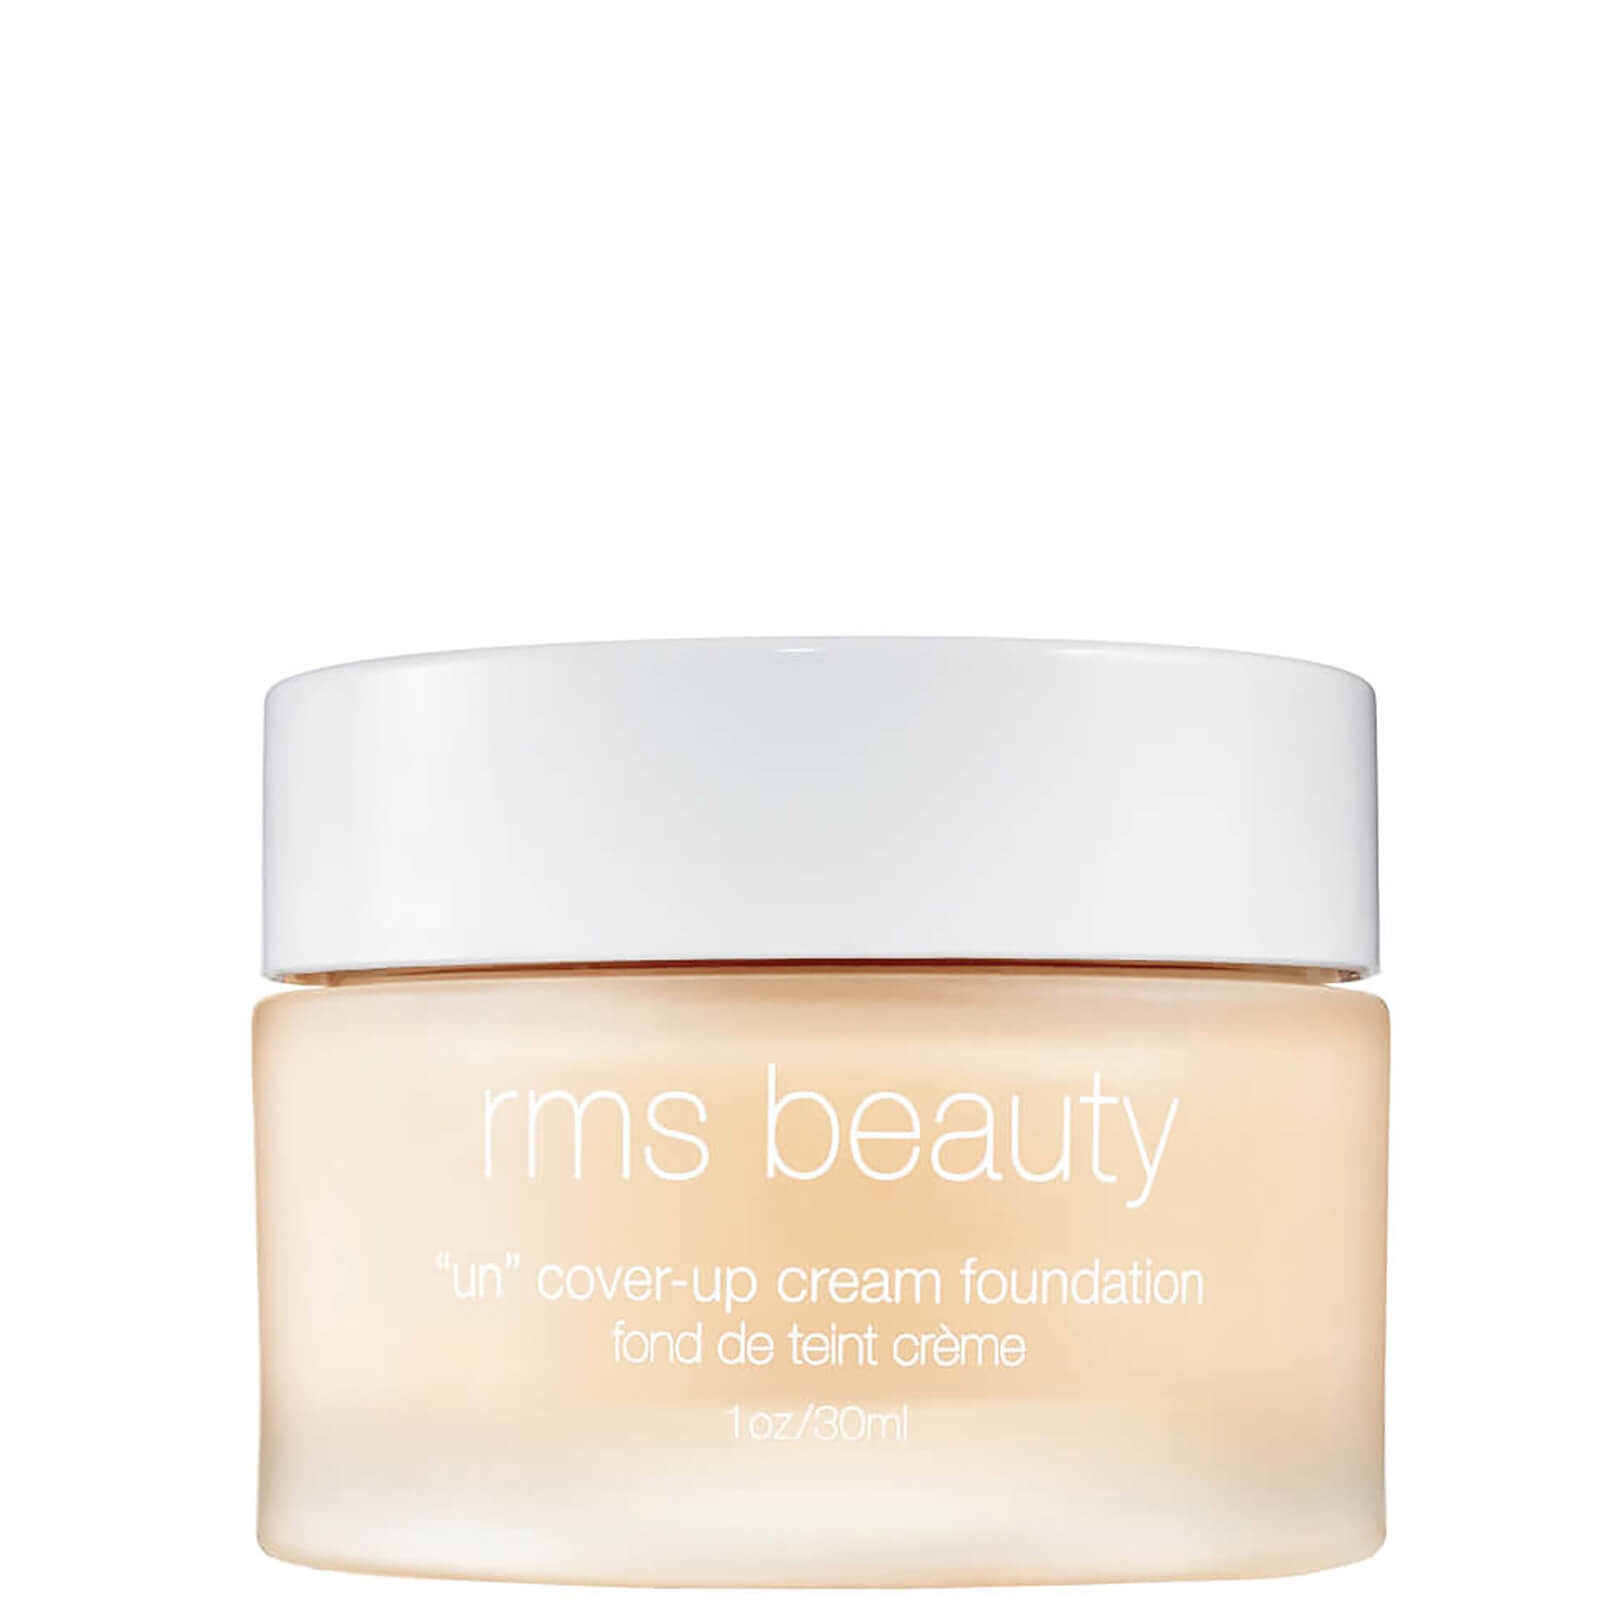 rms beauty uncoverup cream foundation (various shades) - 11.5 donna